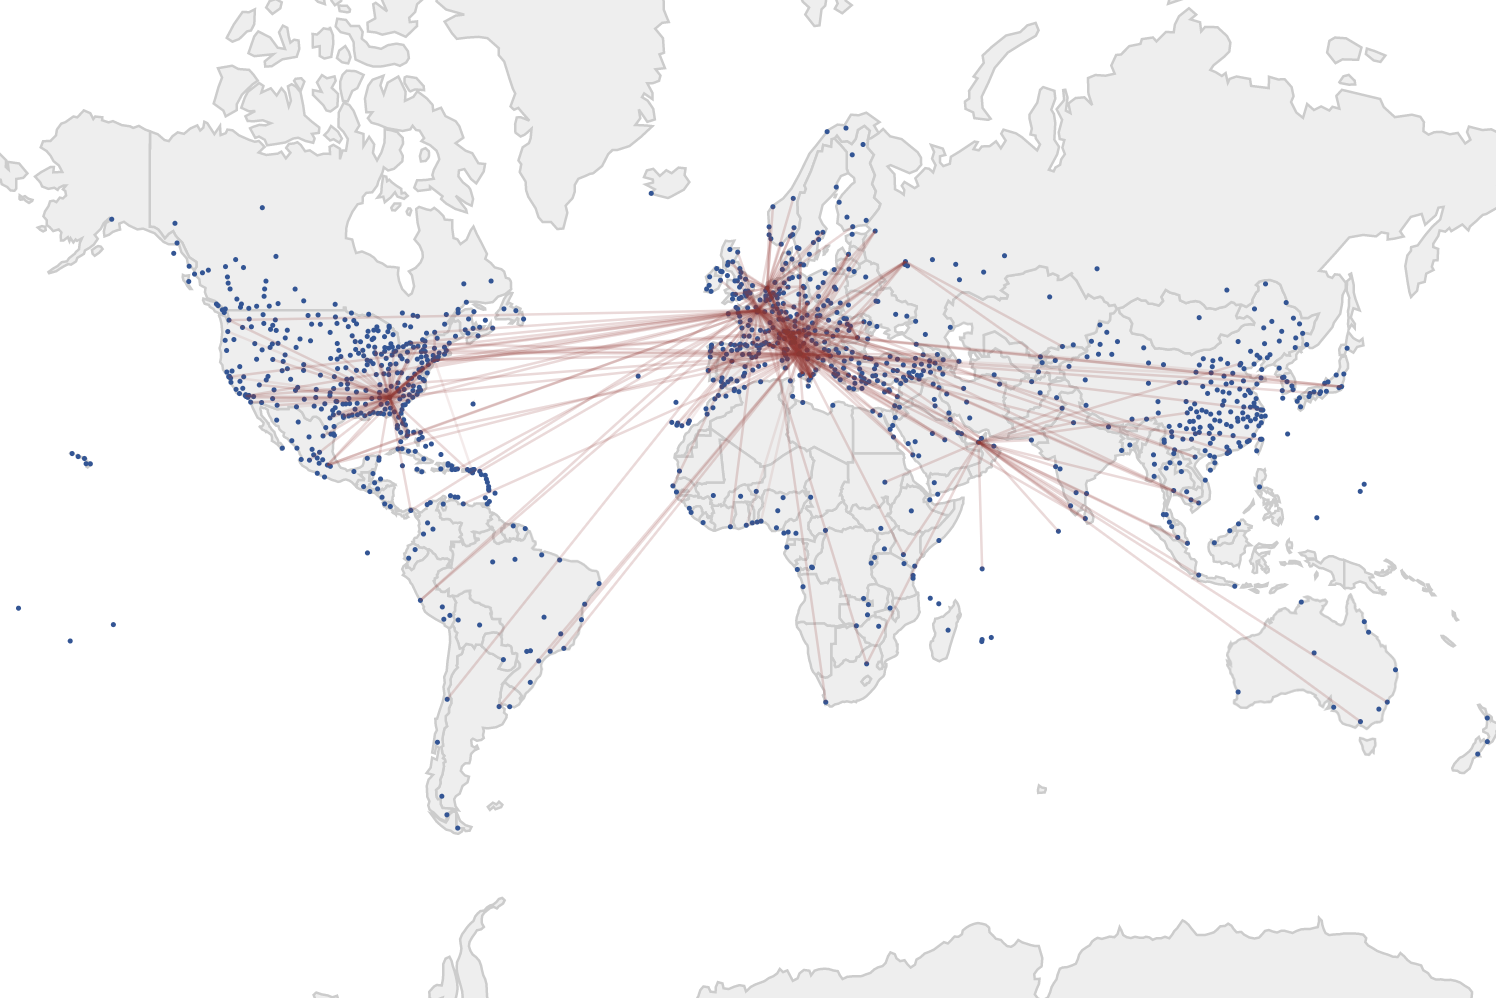 Airline routes, created by D3.js in the context of Coursera course. Some codes are provided by the lecturer